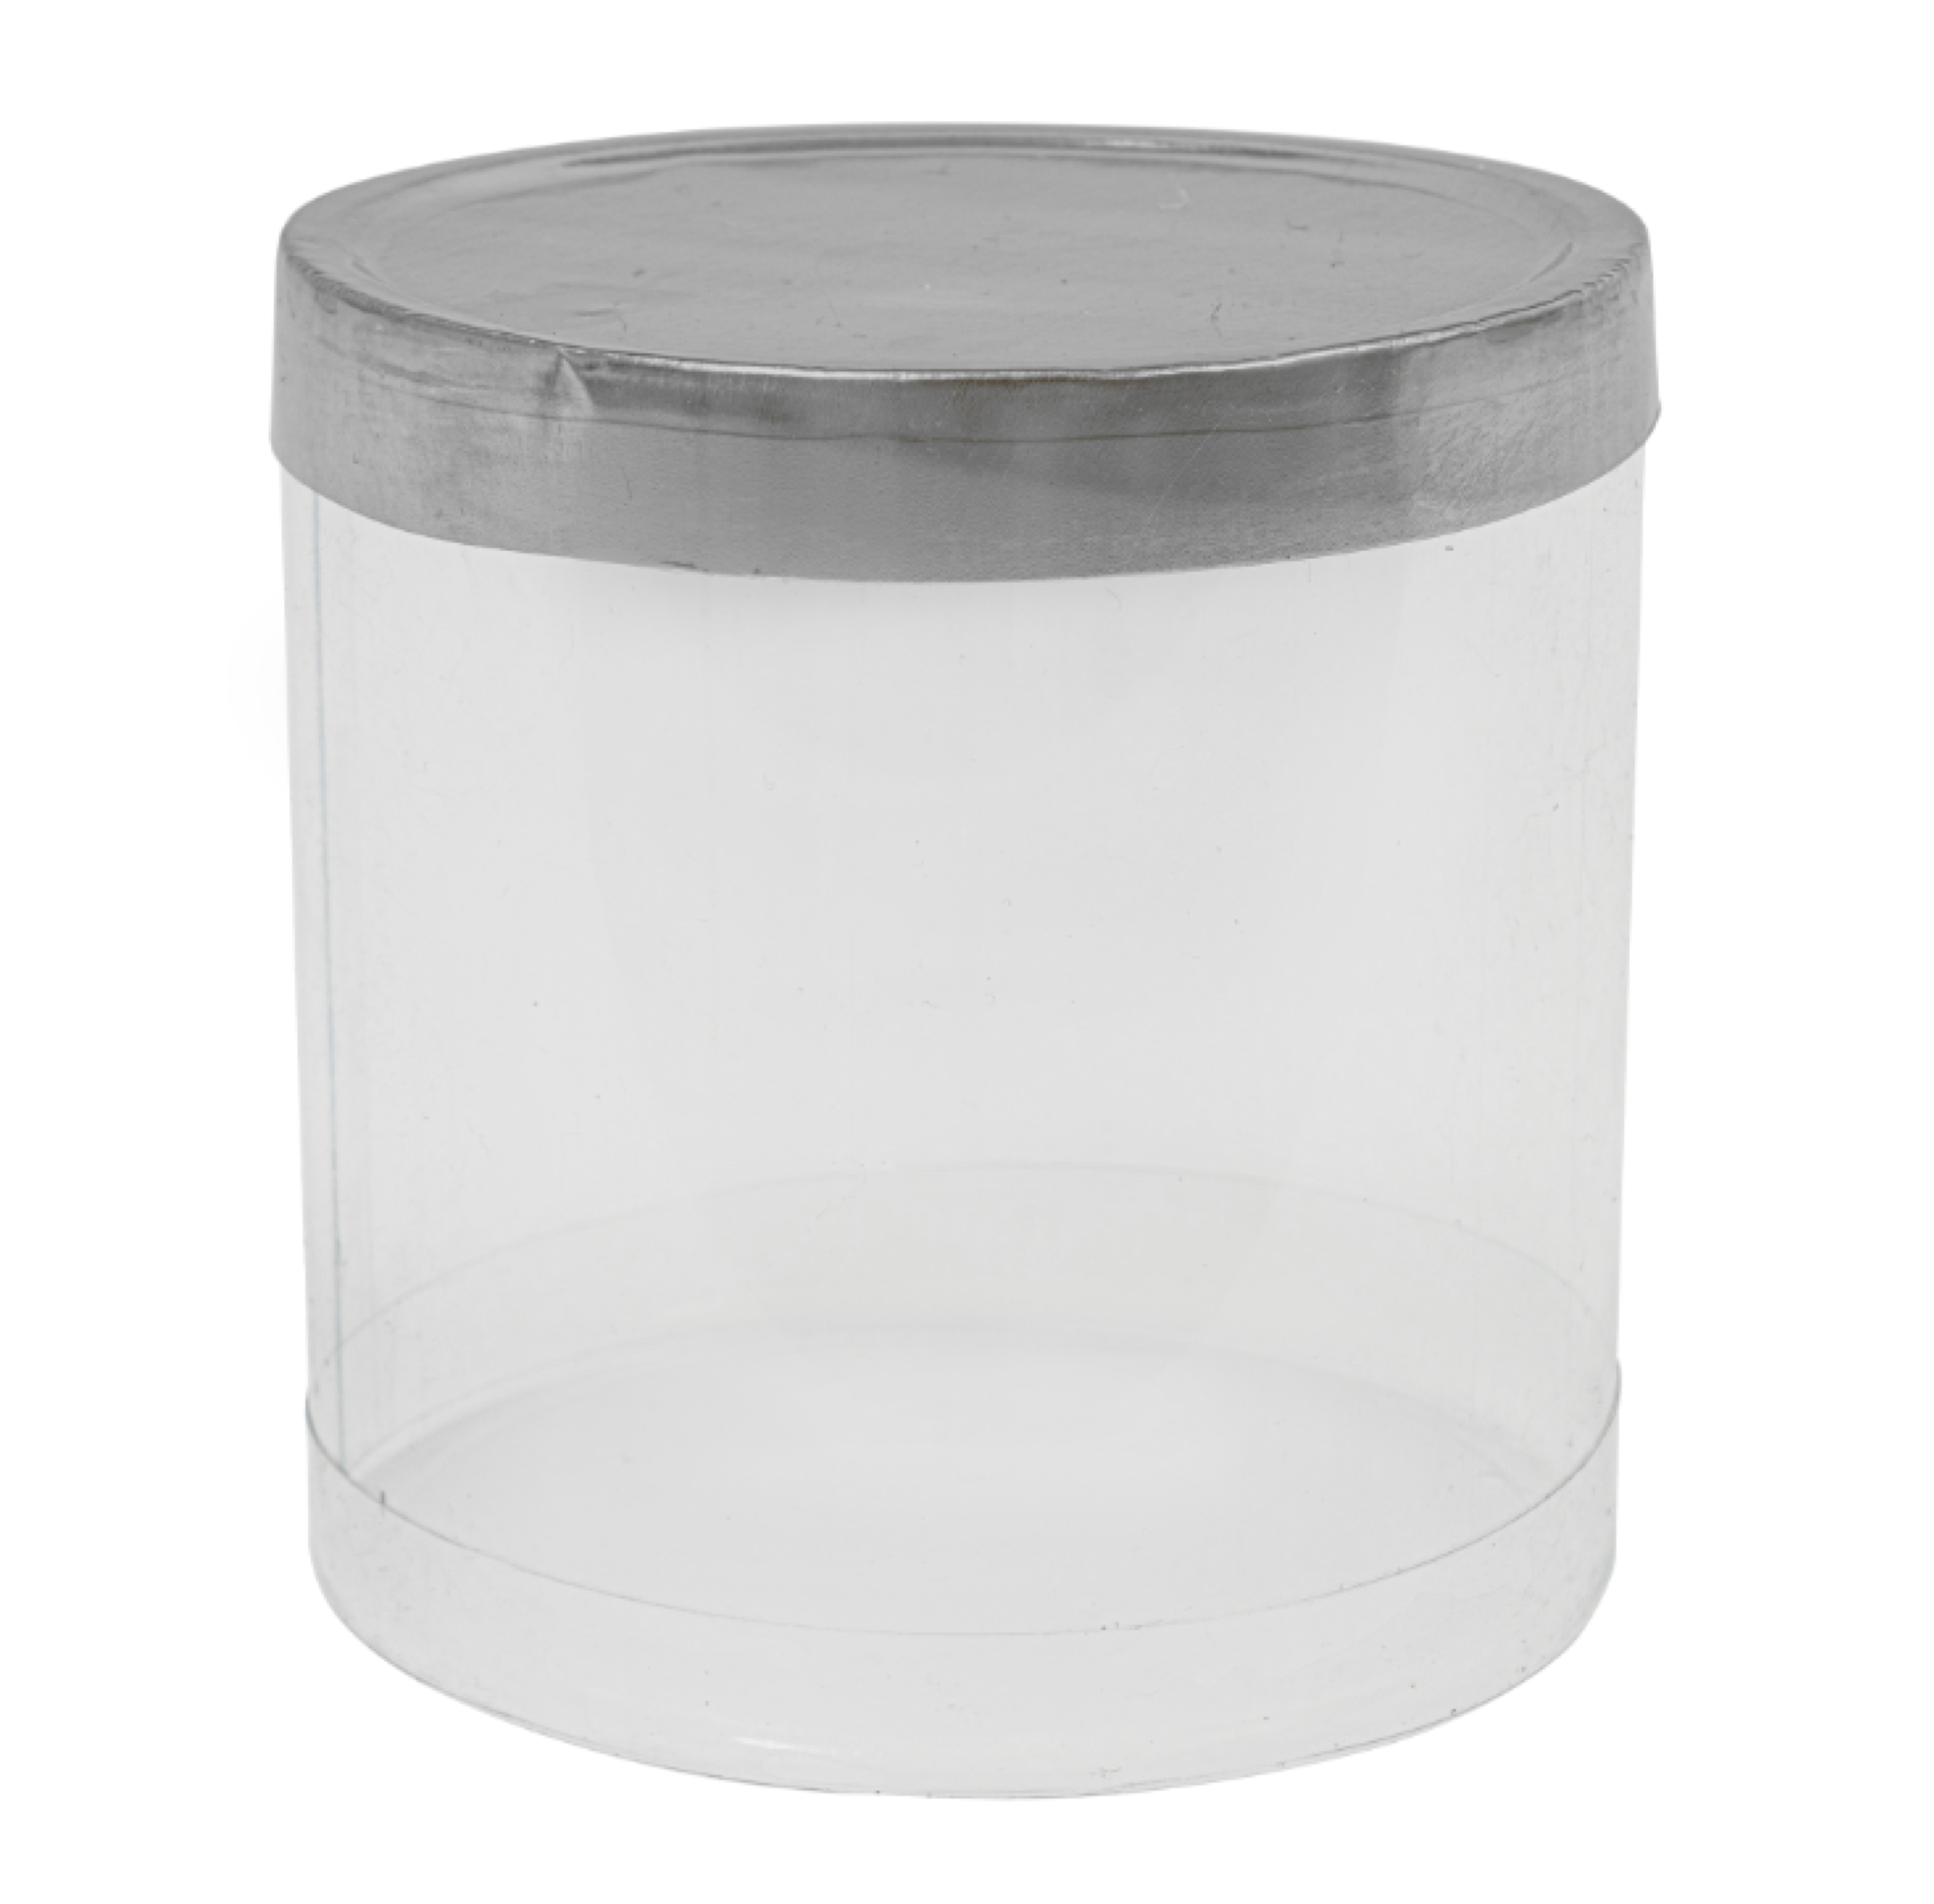 7.99 SILVER PLASTIC CYLINDER CONTAINER 2 INCH 12 PACK 